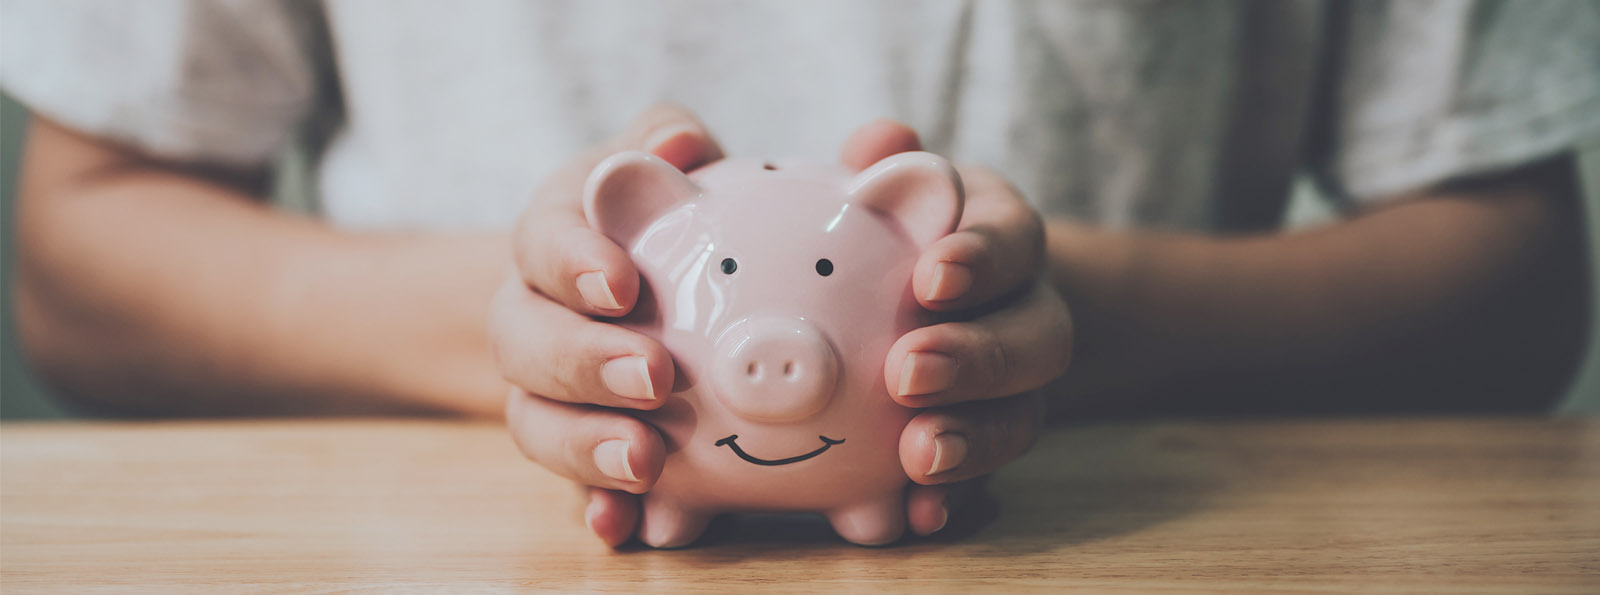 person holding piggy bank